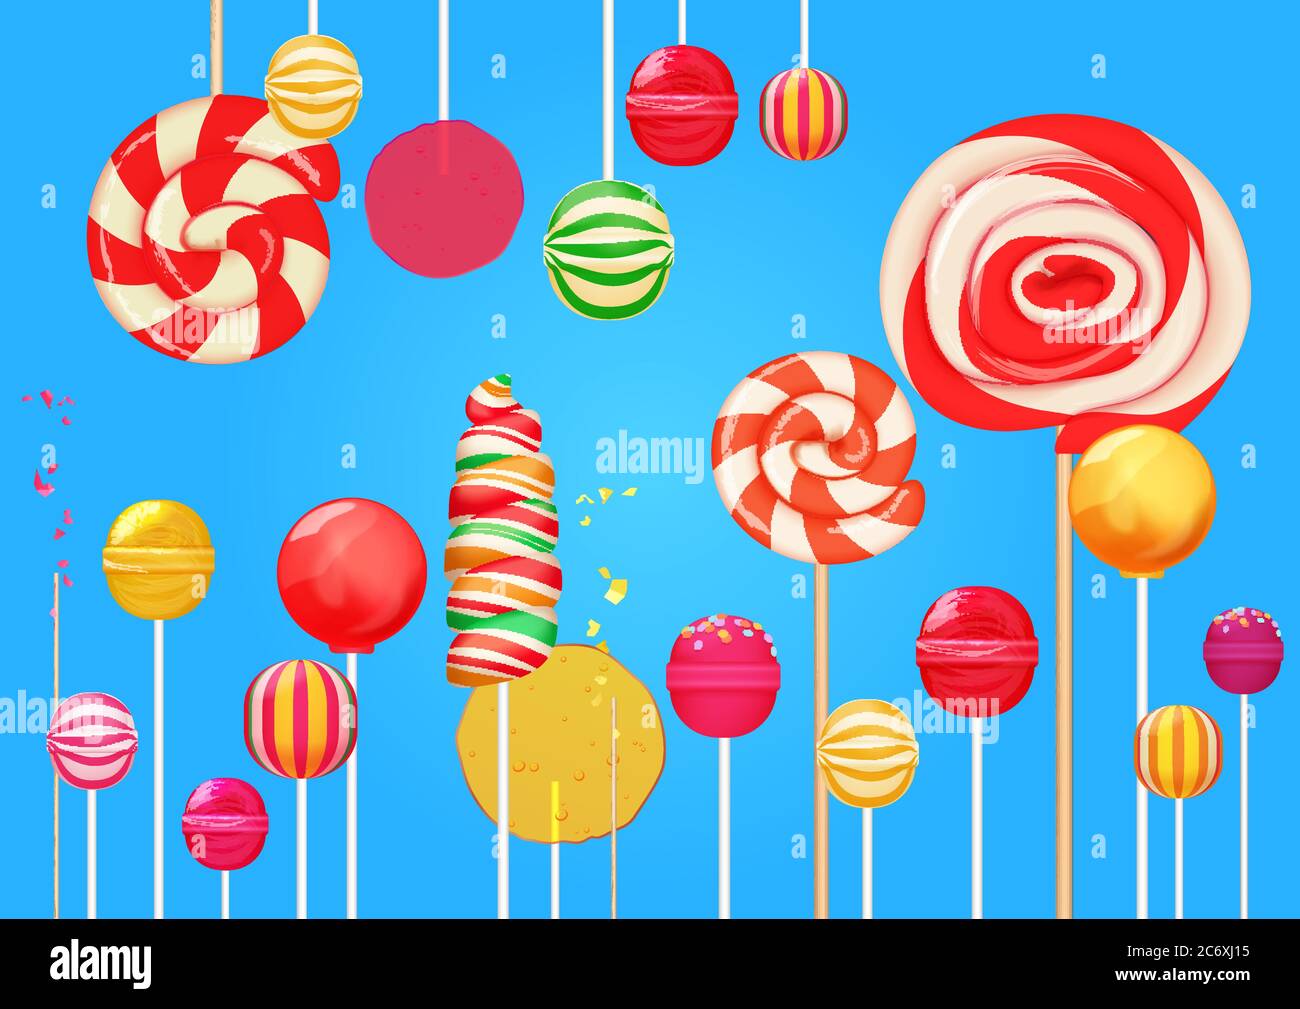 Bright blue sugar background with bright colorful lollipops candy sweets. Candy shop. Sweet color lollipop. Stock Vector